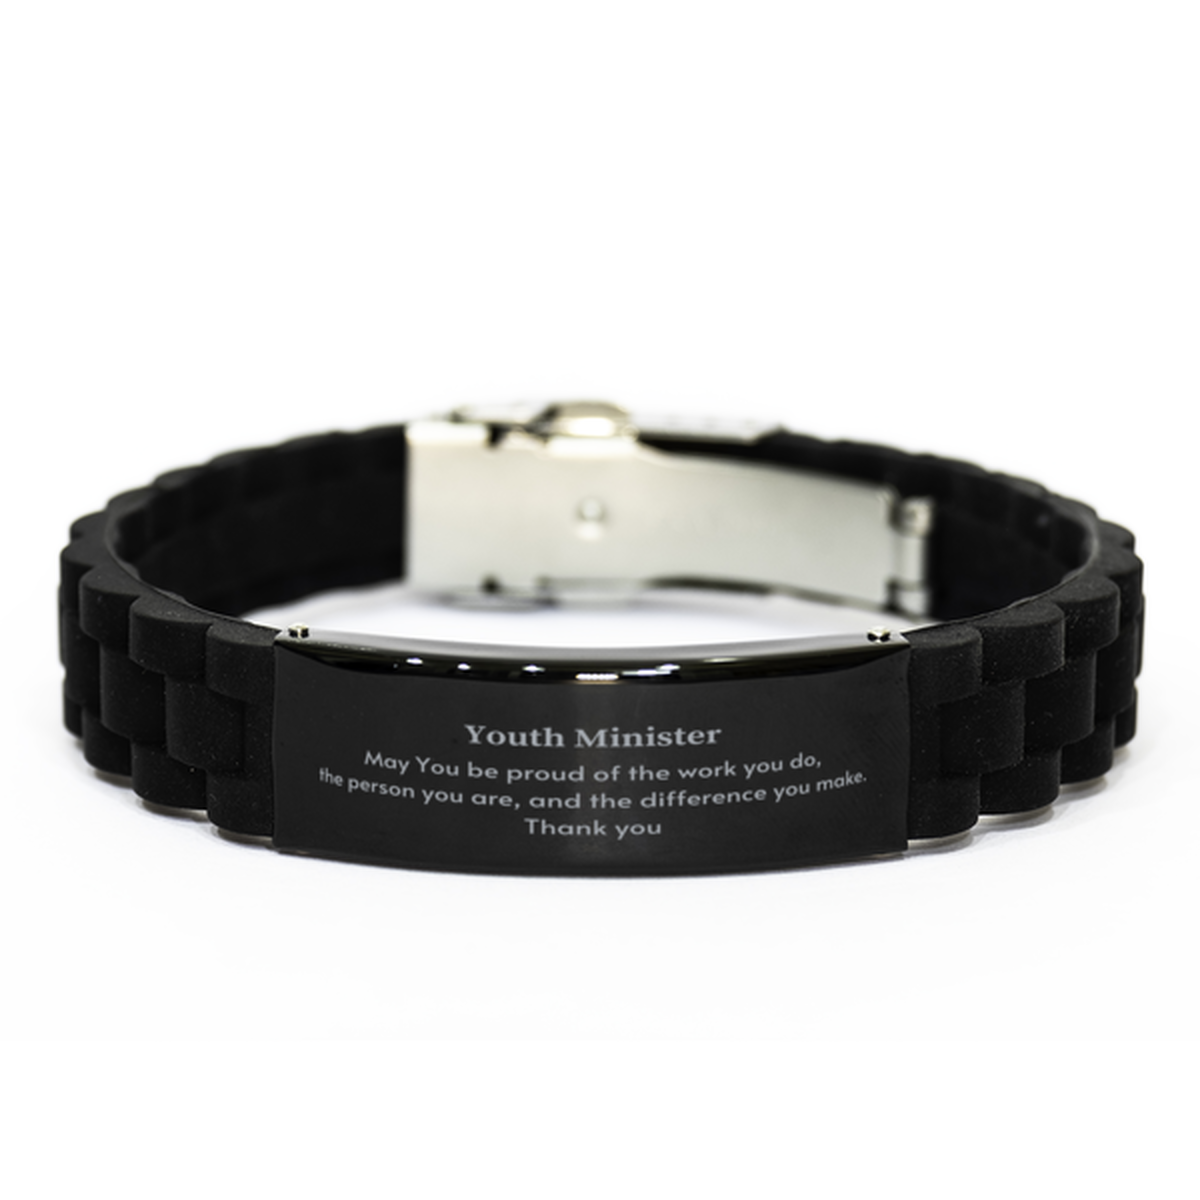 Heartwarming Black Glidelock Clasp Bracelet Retirement Coworkers Gifts for Youth Minister, Youth Minister May You be proud of the work you do, the person you are Gifts for Boss Men Women Friends